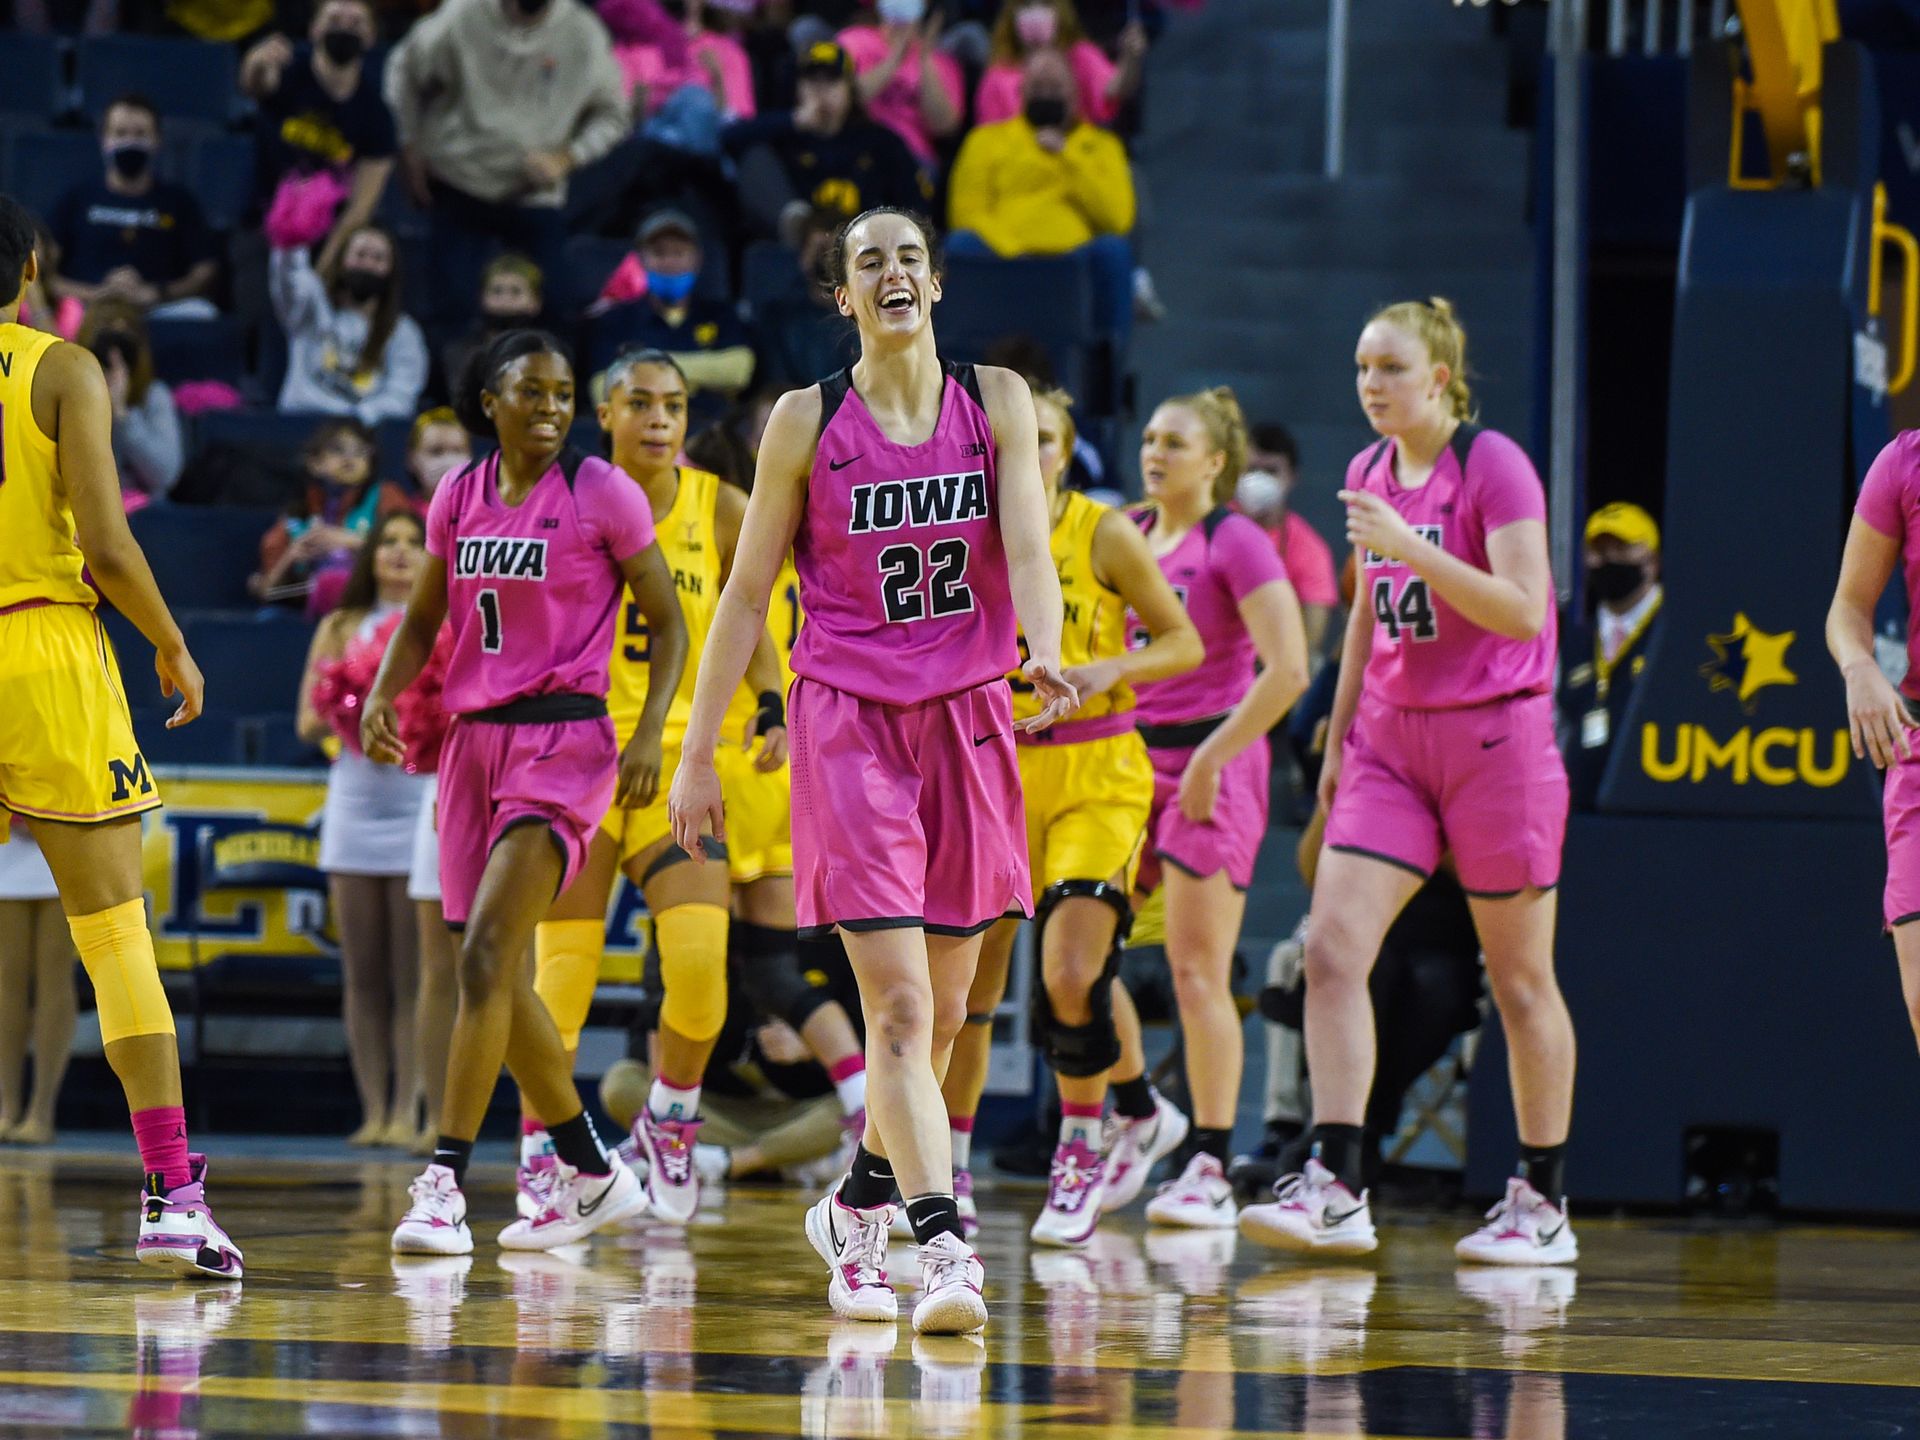 March Madness: The legend of Iowa's Caitlin Clark grows in epic